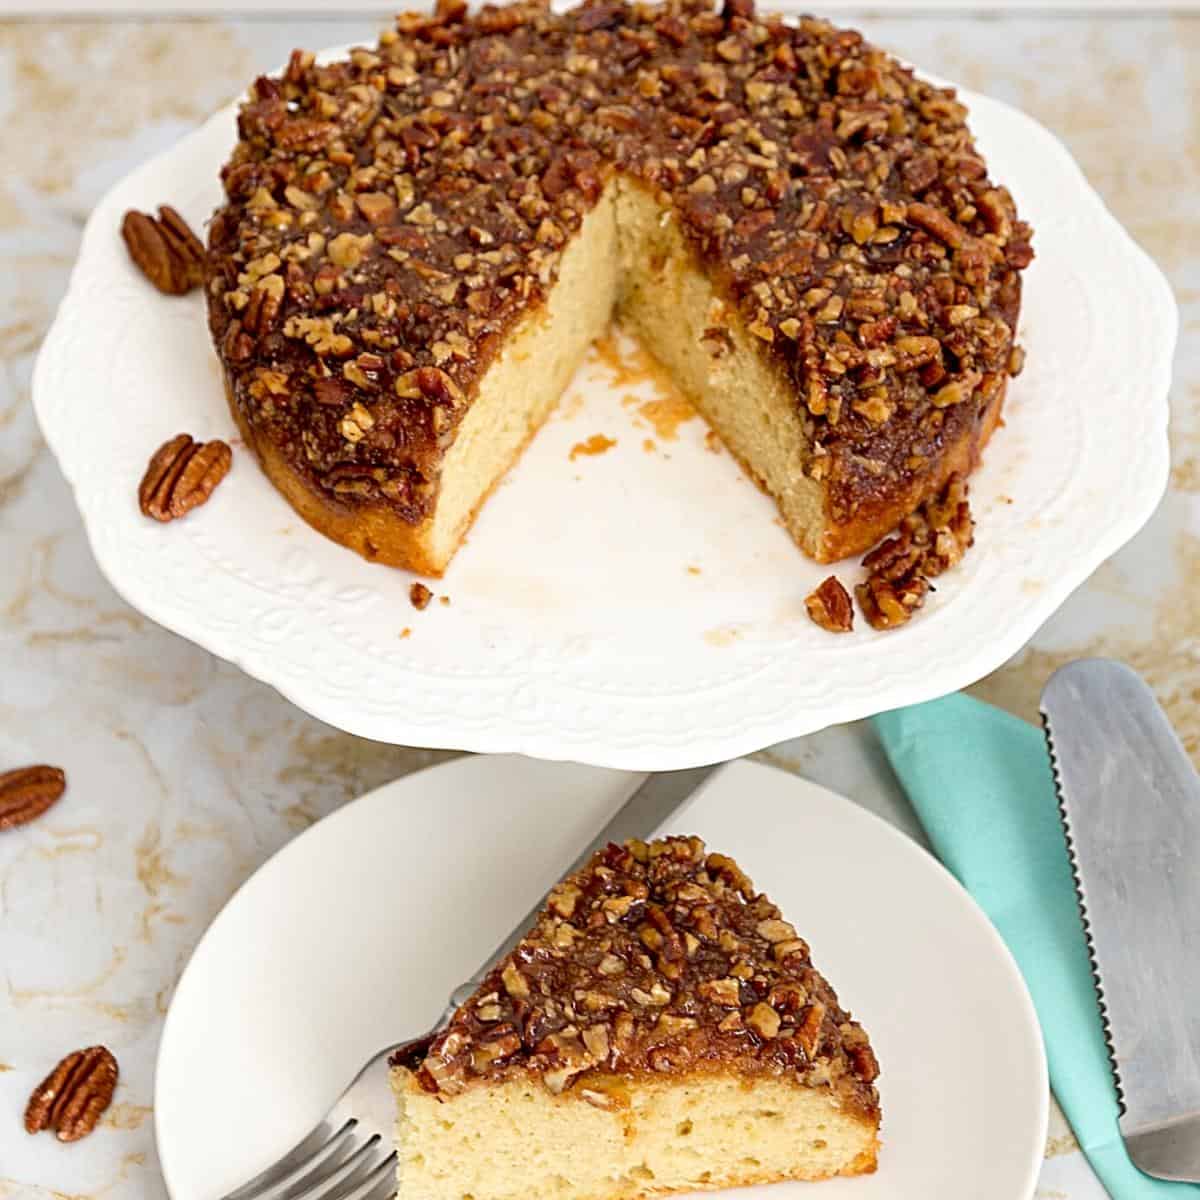 A pecan cake on a cake stand.